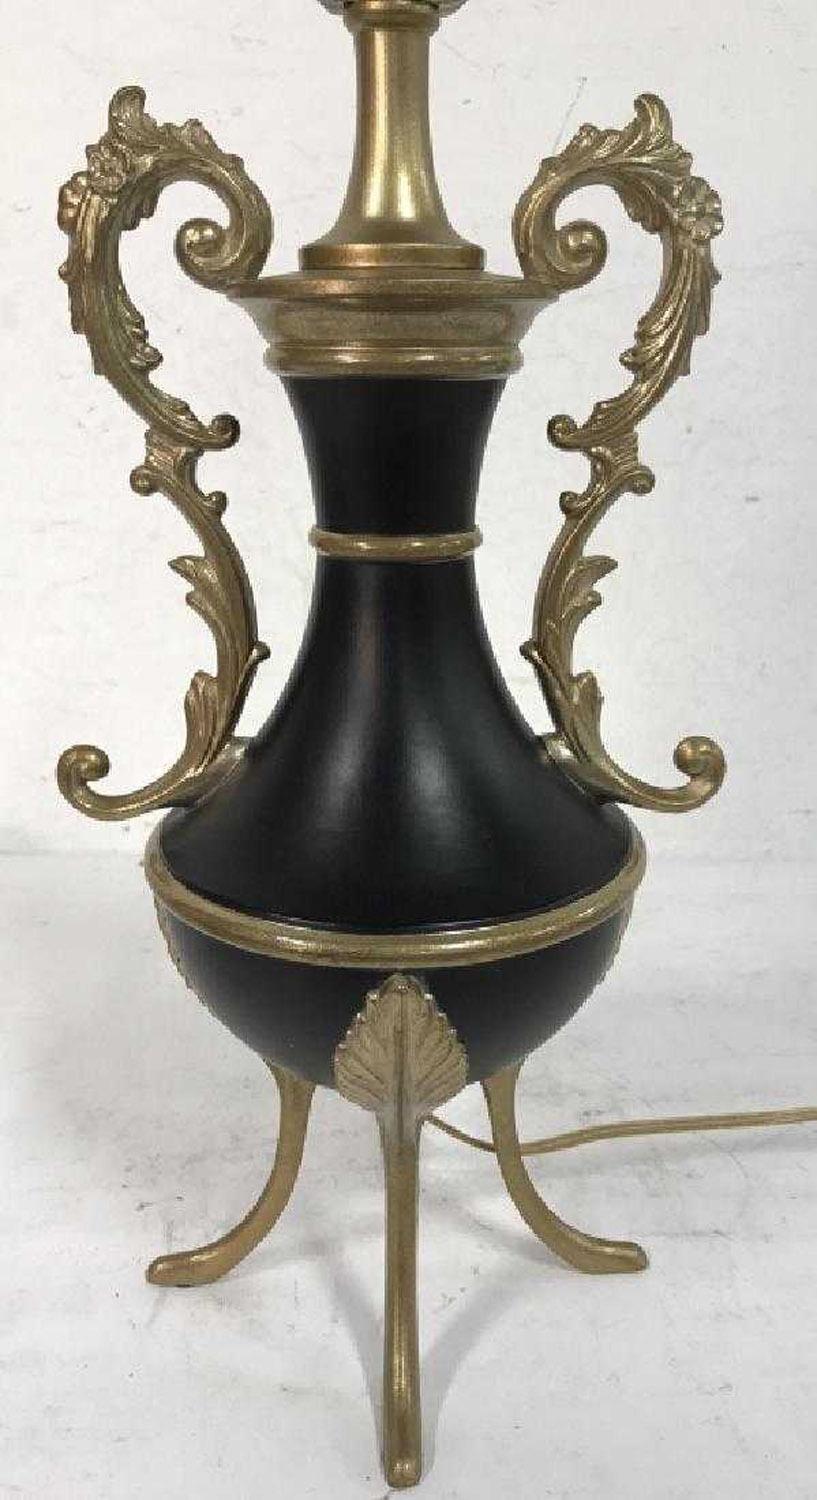 The vintage classical urn-shaped lamp has a black body and gold toned legs, rings and a pair of ornate detailed handles with 